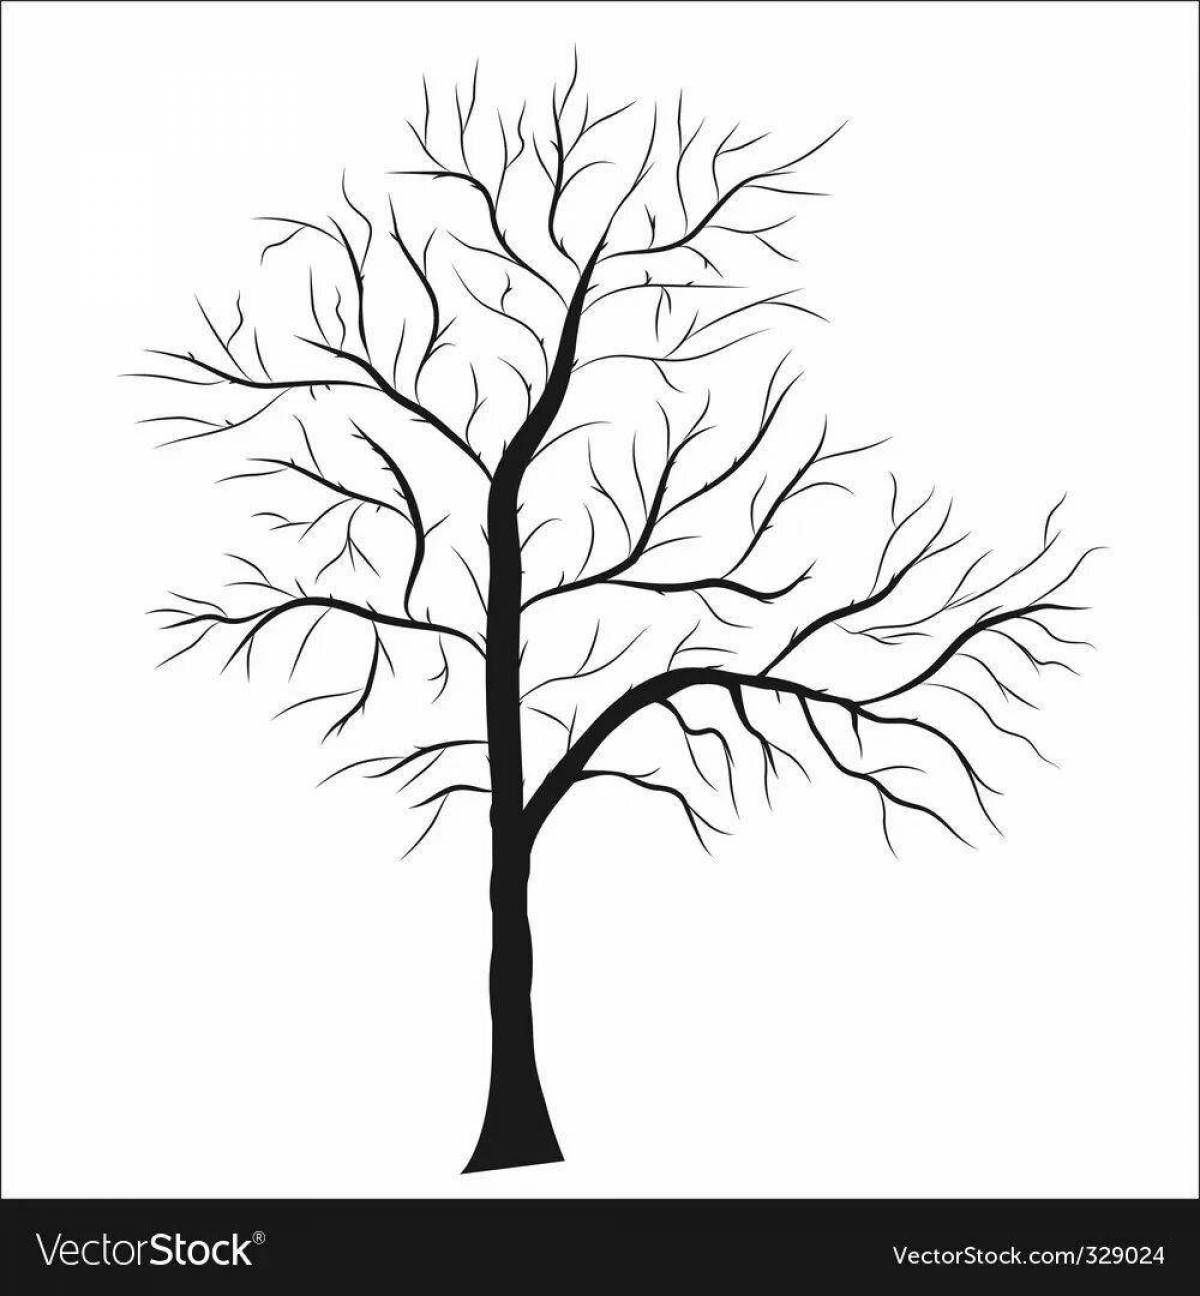 Adorable winter tree coloring page for kids